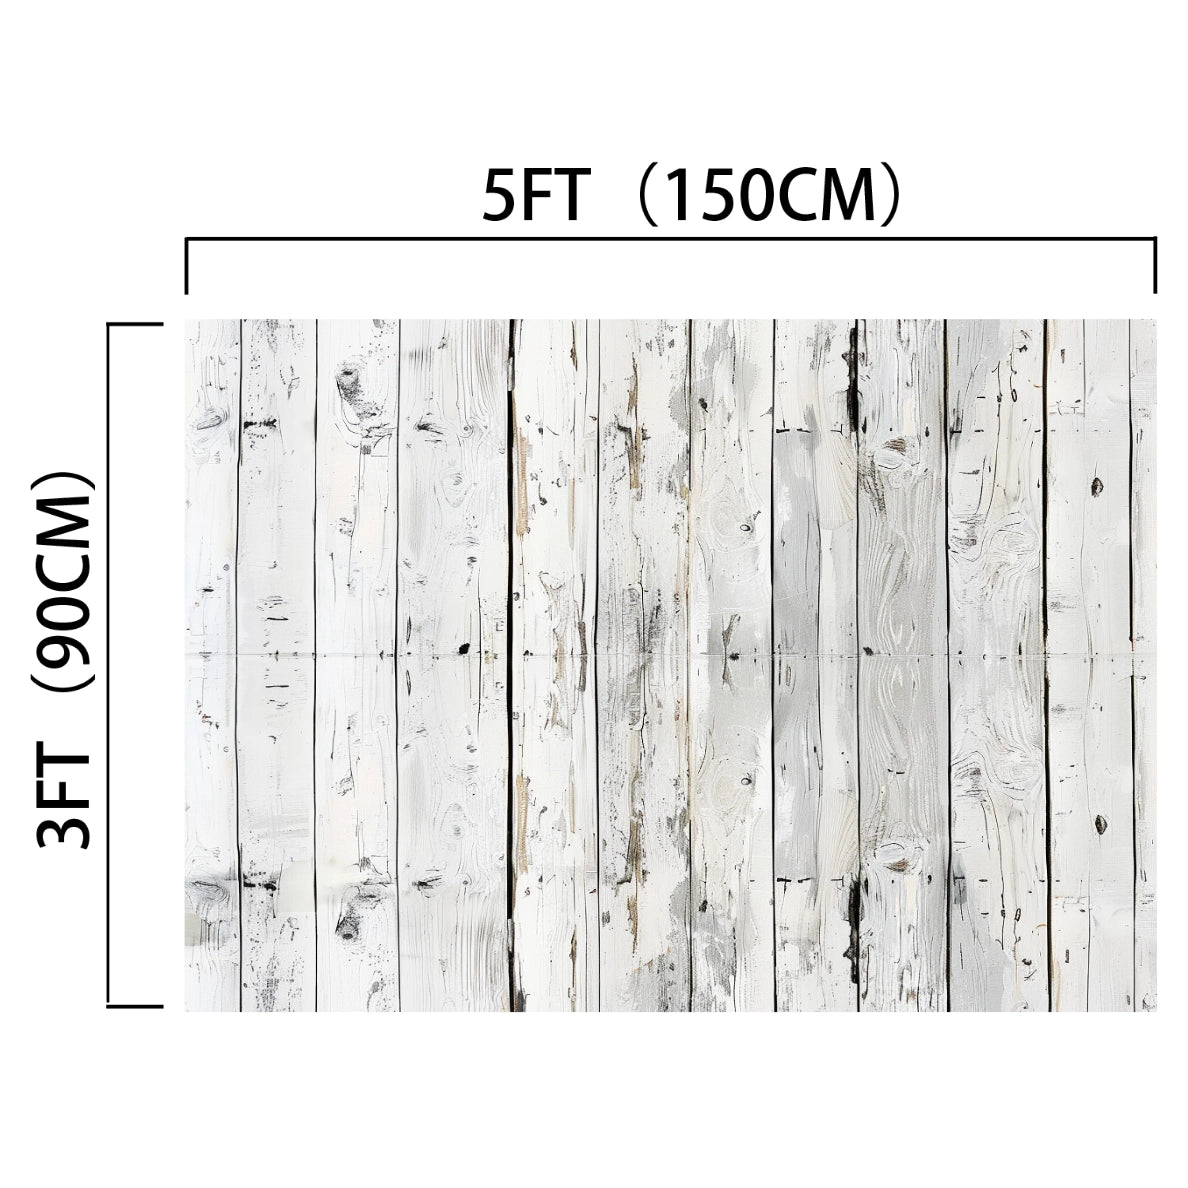 An ideasbackdrop Wood Backdrop Retro Rustic White Gray Wooden Floor Background for Photography Kids Photo Booth Video Shoot Studio Prop measuring 5 feet (150 cm) in width and 3 feet (90 cm) in height, featuring a design of vertical whitewashed wooden planks and high-resolution printing for stunning detail and wrinkle resistance for easy setup.